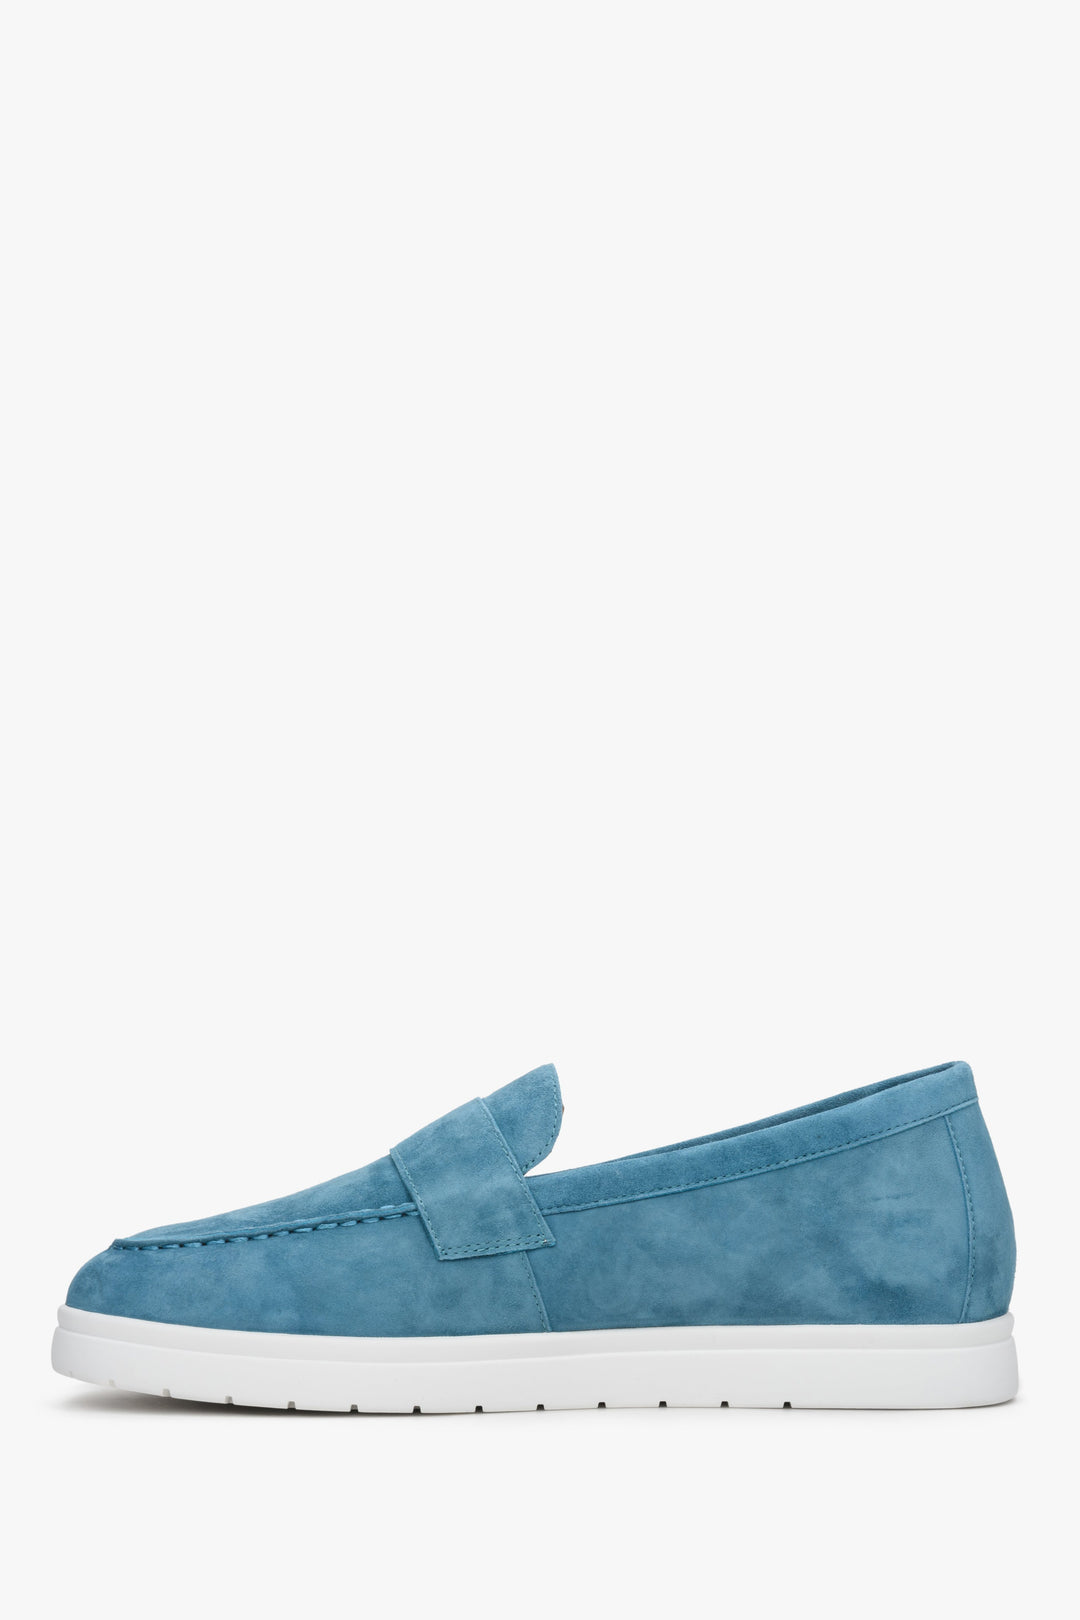 Blue Estro women's moccasins made of genuine velour for spring and fall - shoe profile.